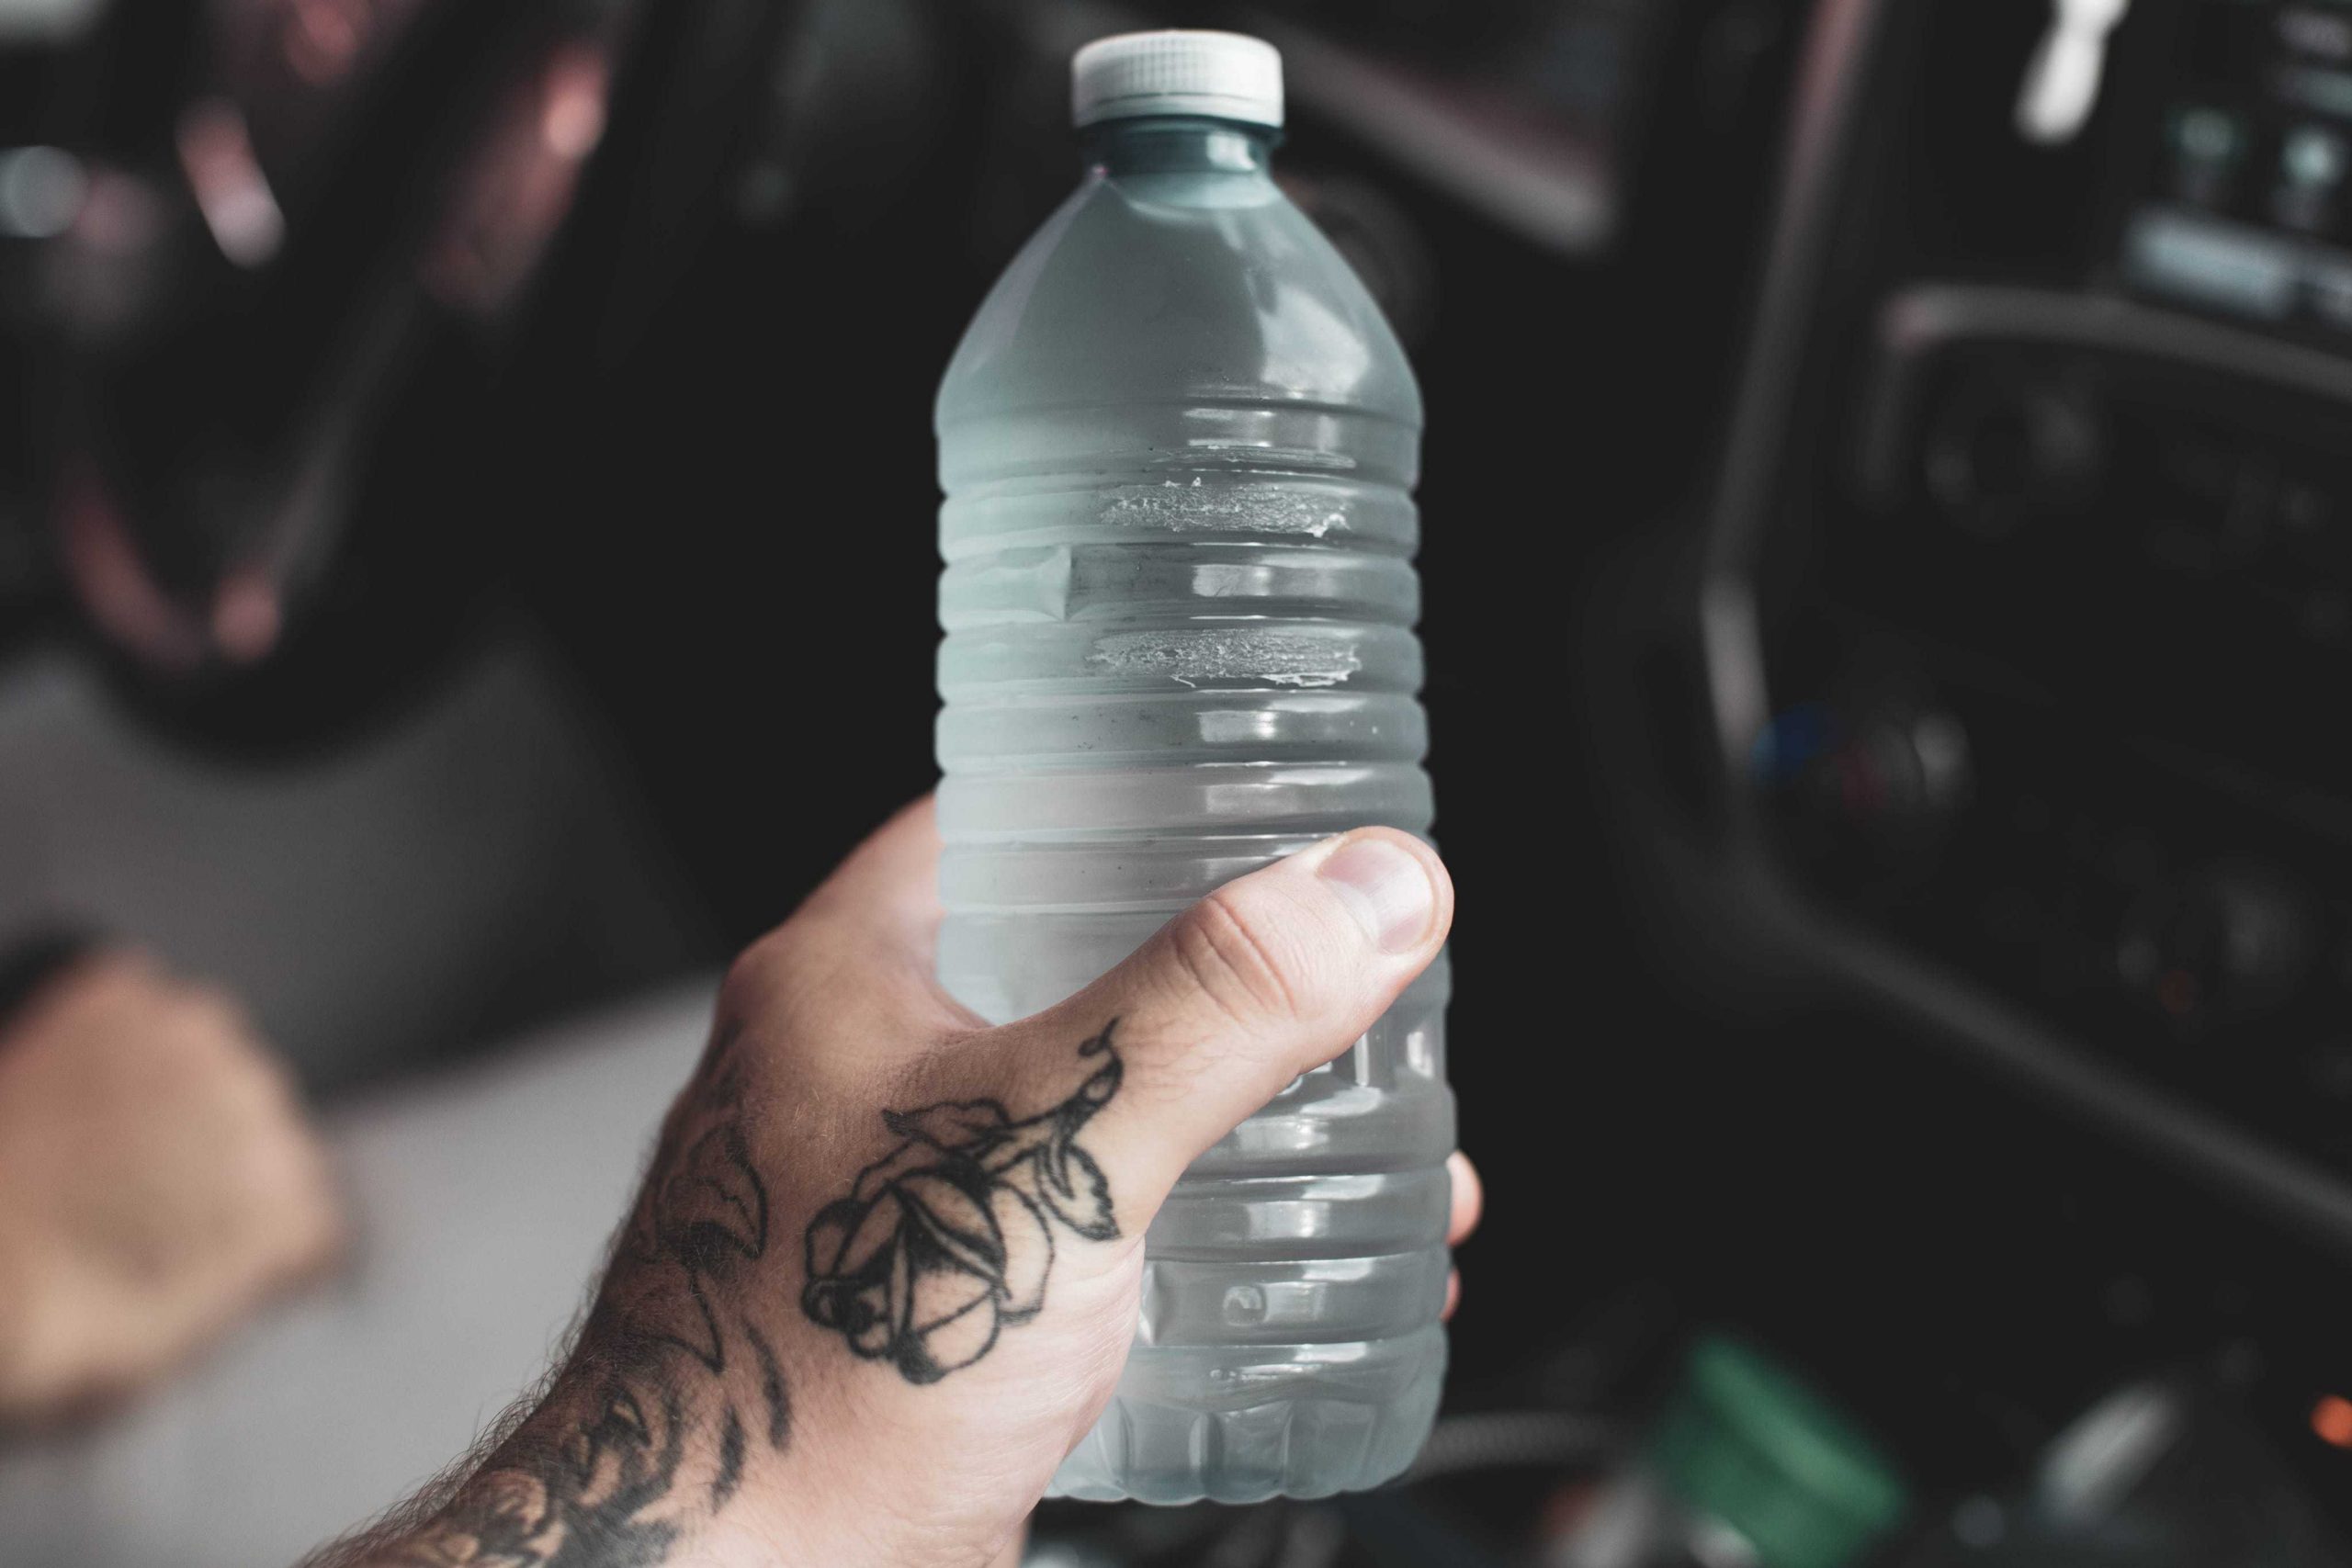 The source of Horizon bottled water is the subject of a fierce feud.